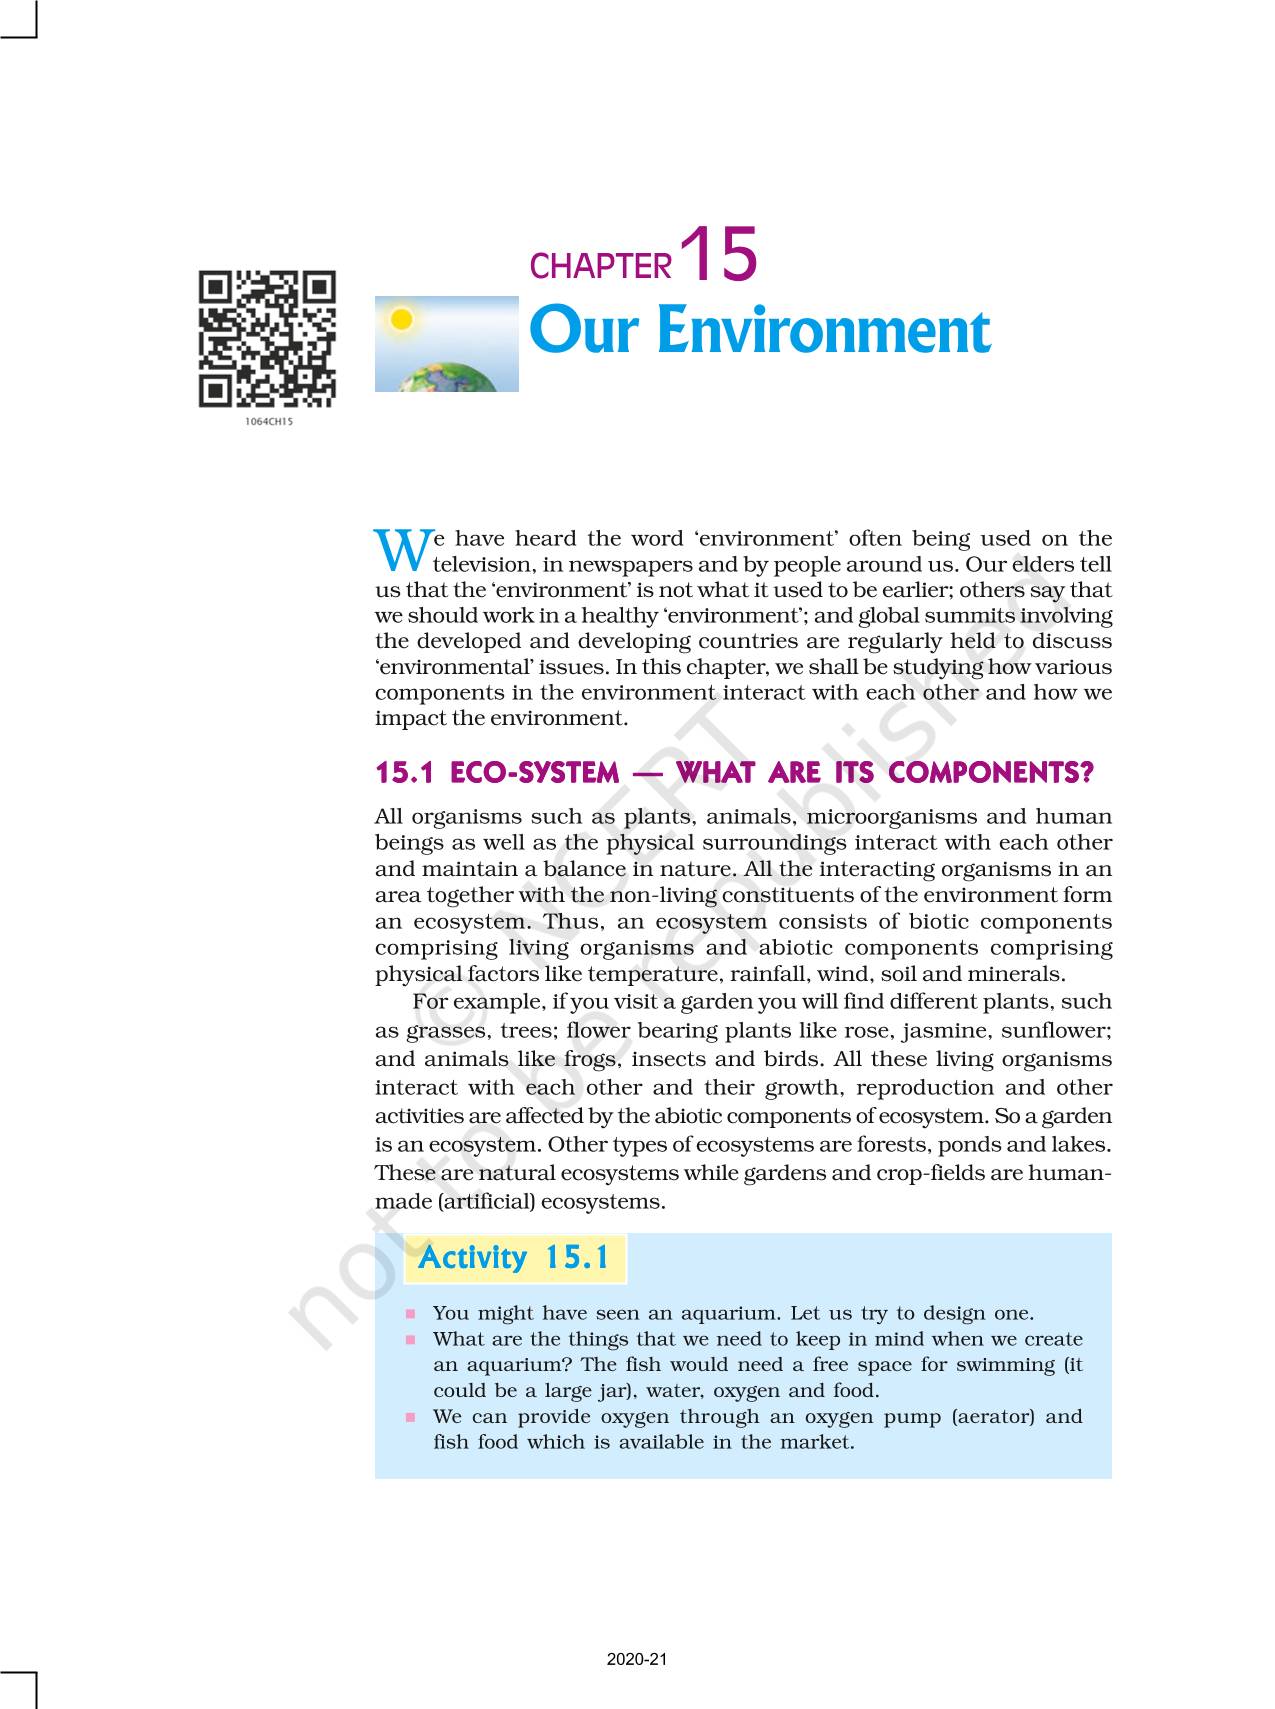 assignment on our environment class 10